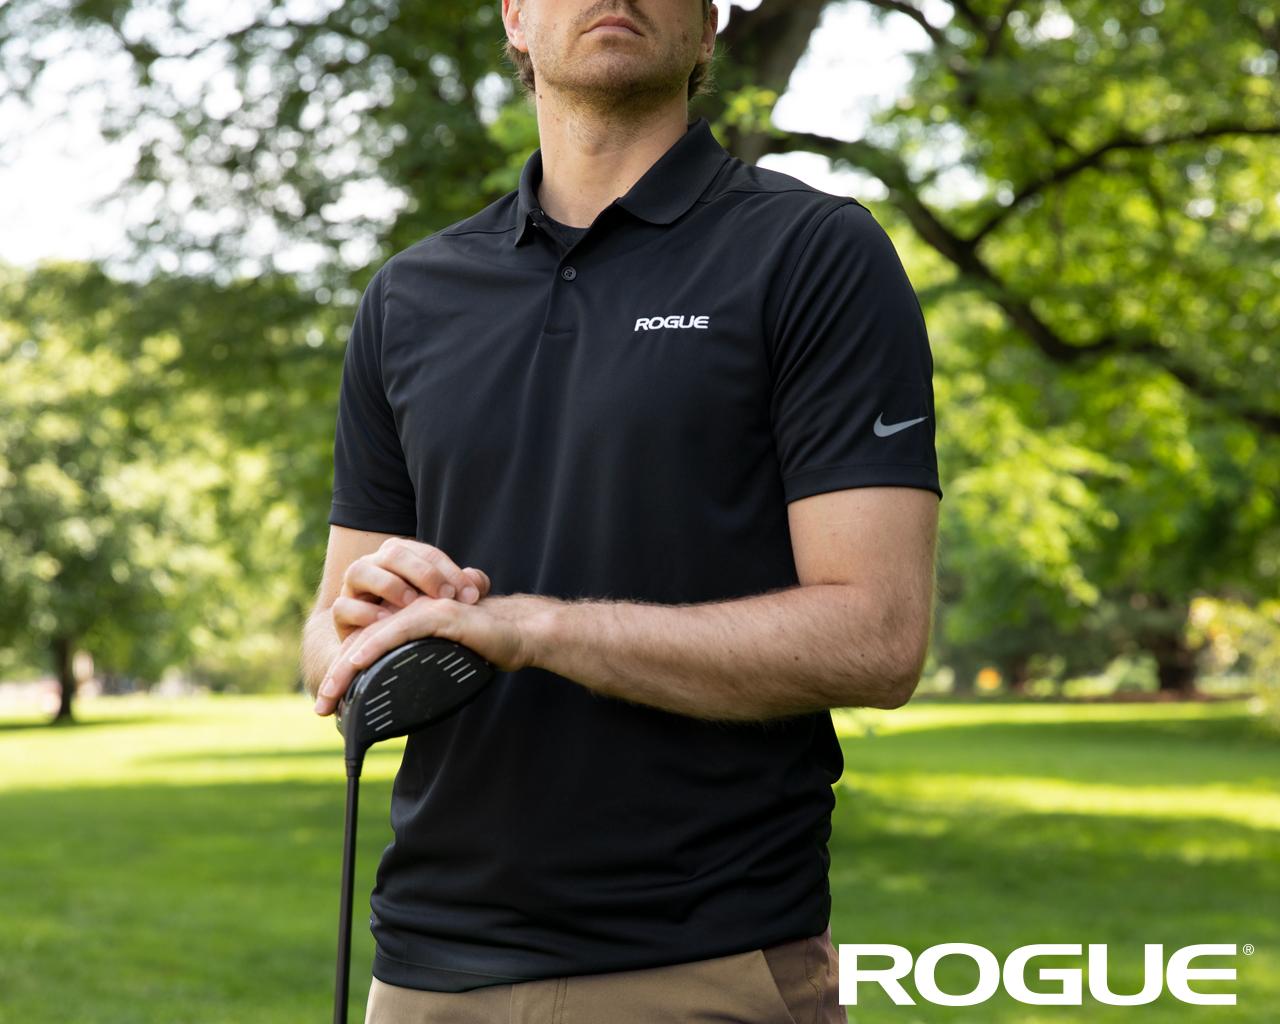 Rogue on Twitter: "Hit the links in the new Nike Dri-FIT Polo Men's: https://t.co/6TOhznAWrp Women's: https://t.co/eHa0KRDKps https://t.co/uWMolJA8fS" / Twitter